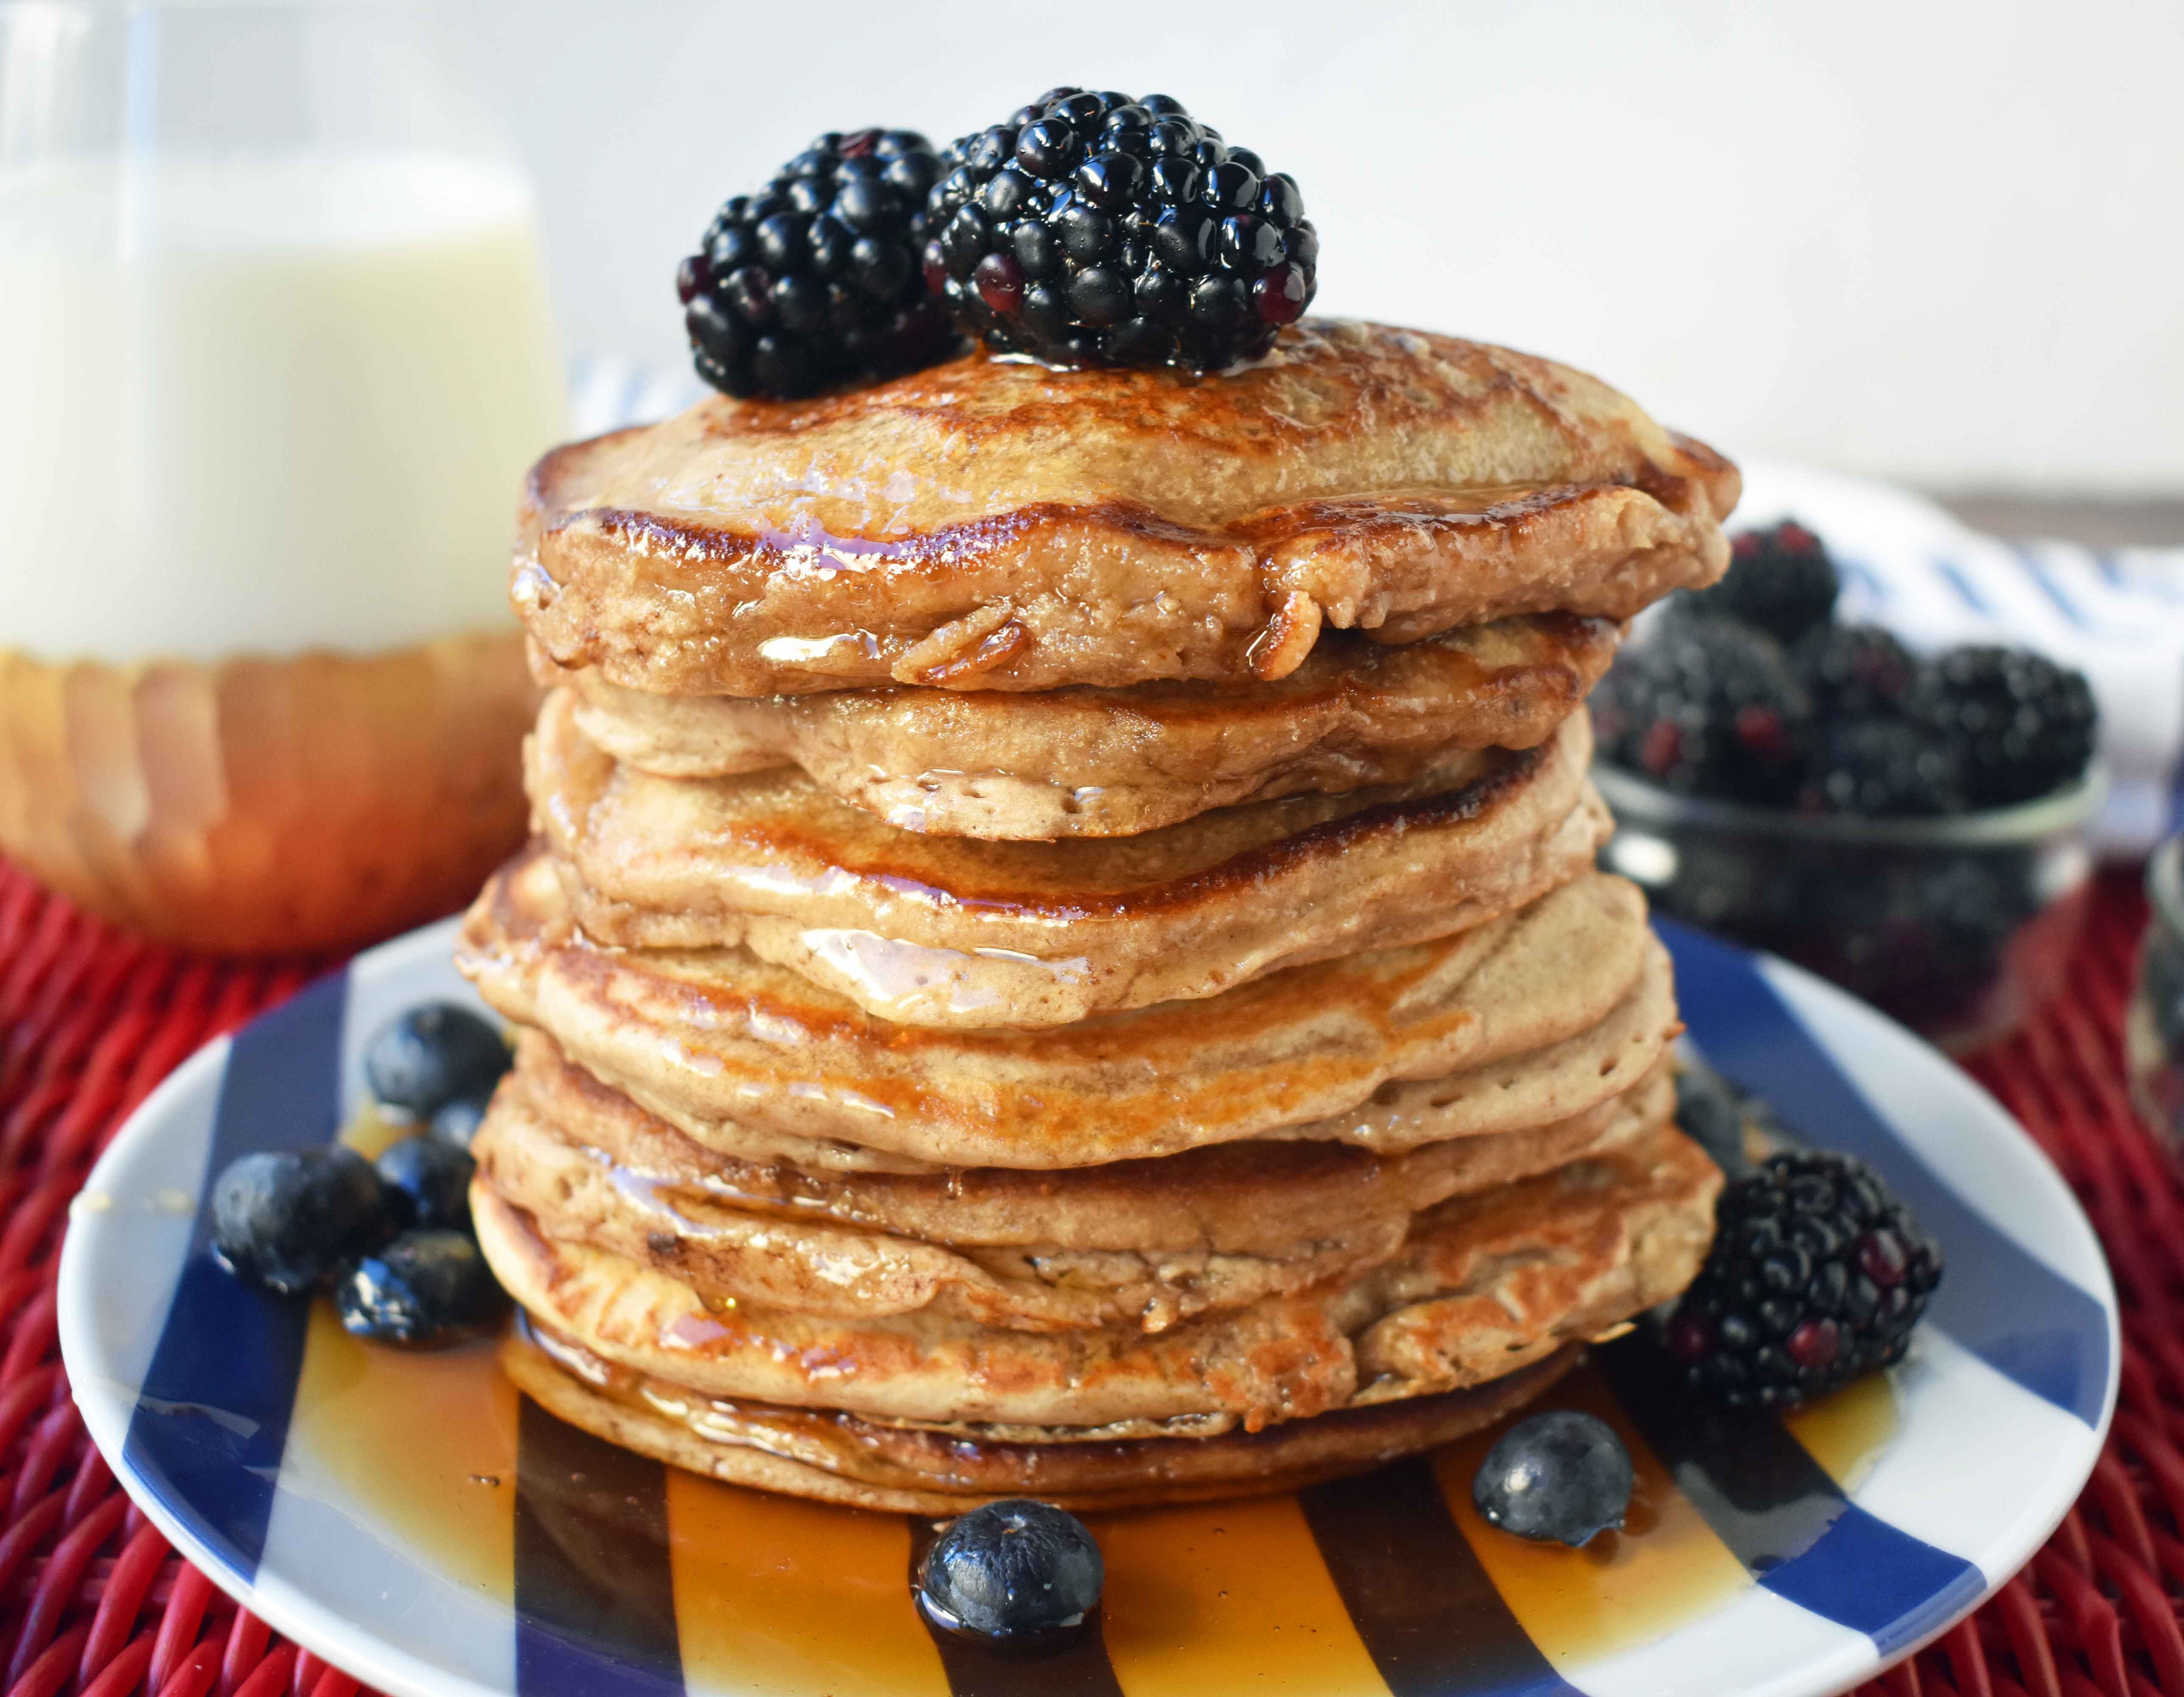 Healthy Banana Oatmeal Pancakes by Modern Honey. No sugar, No oil, Gluten-free, Dairy-free pancakes. Made with only 7 ingredients.